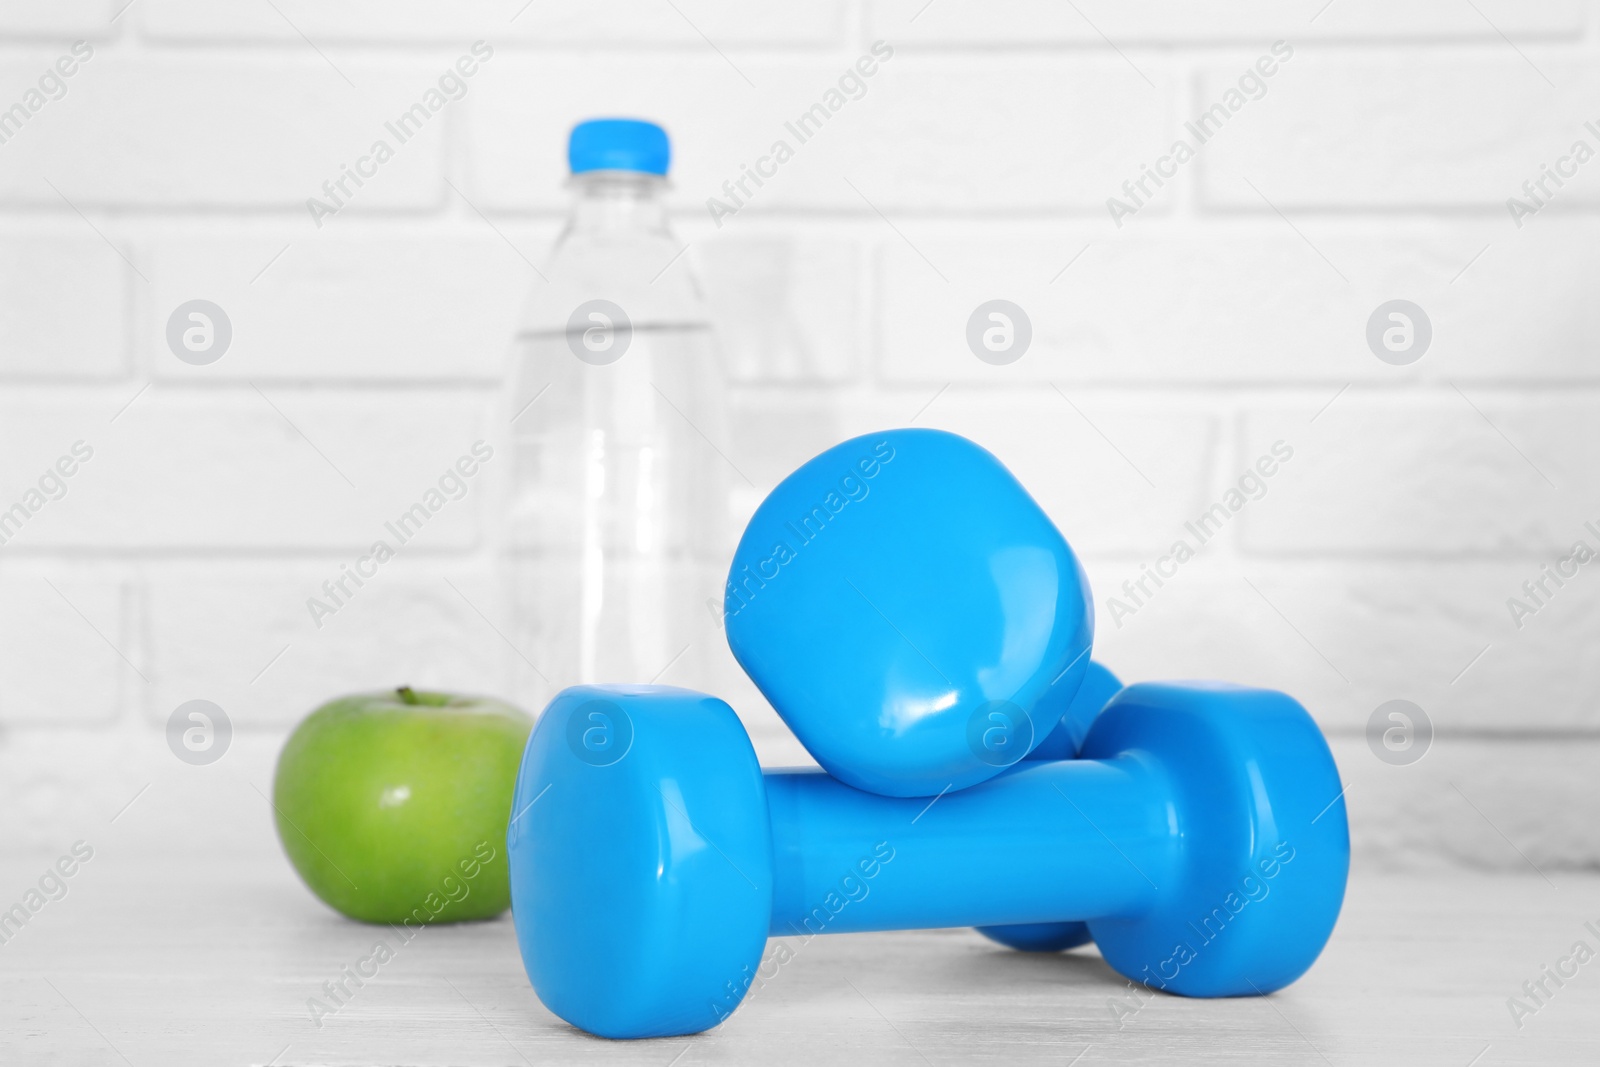 Photo of Stylish dumbbells, apple and bottle of water on table against brick wall. Home fitness